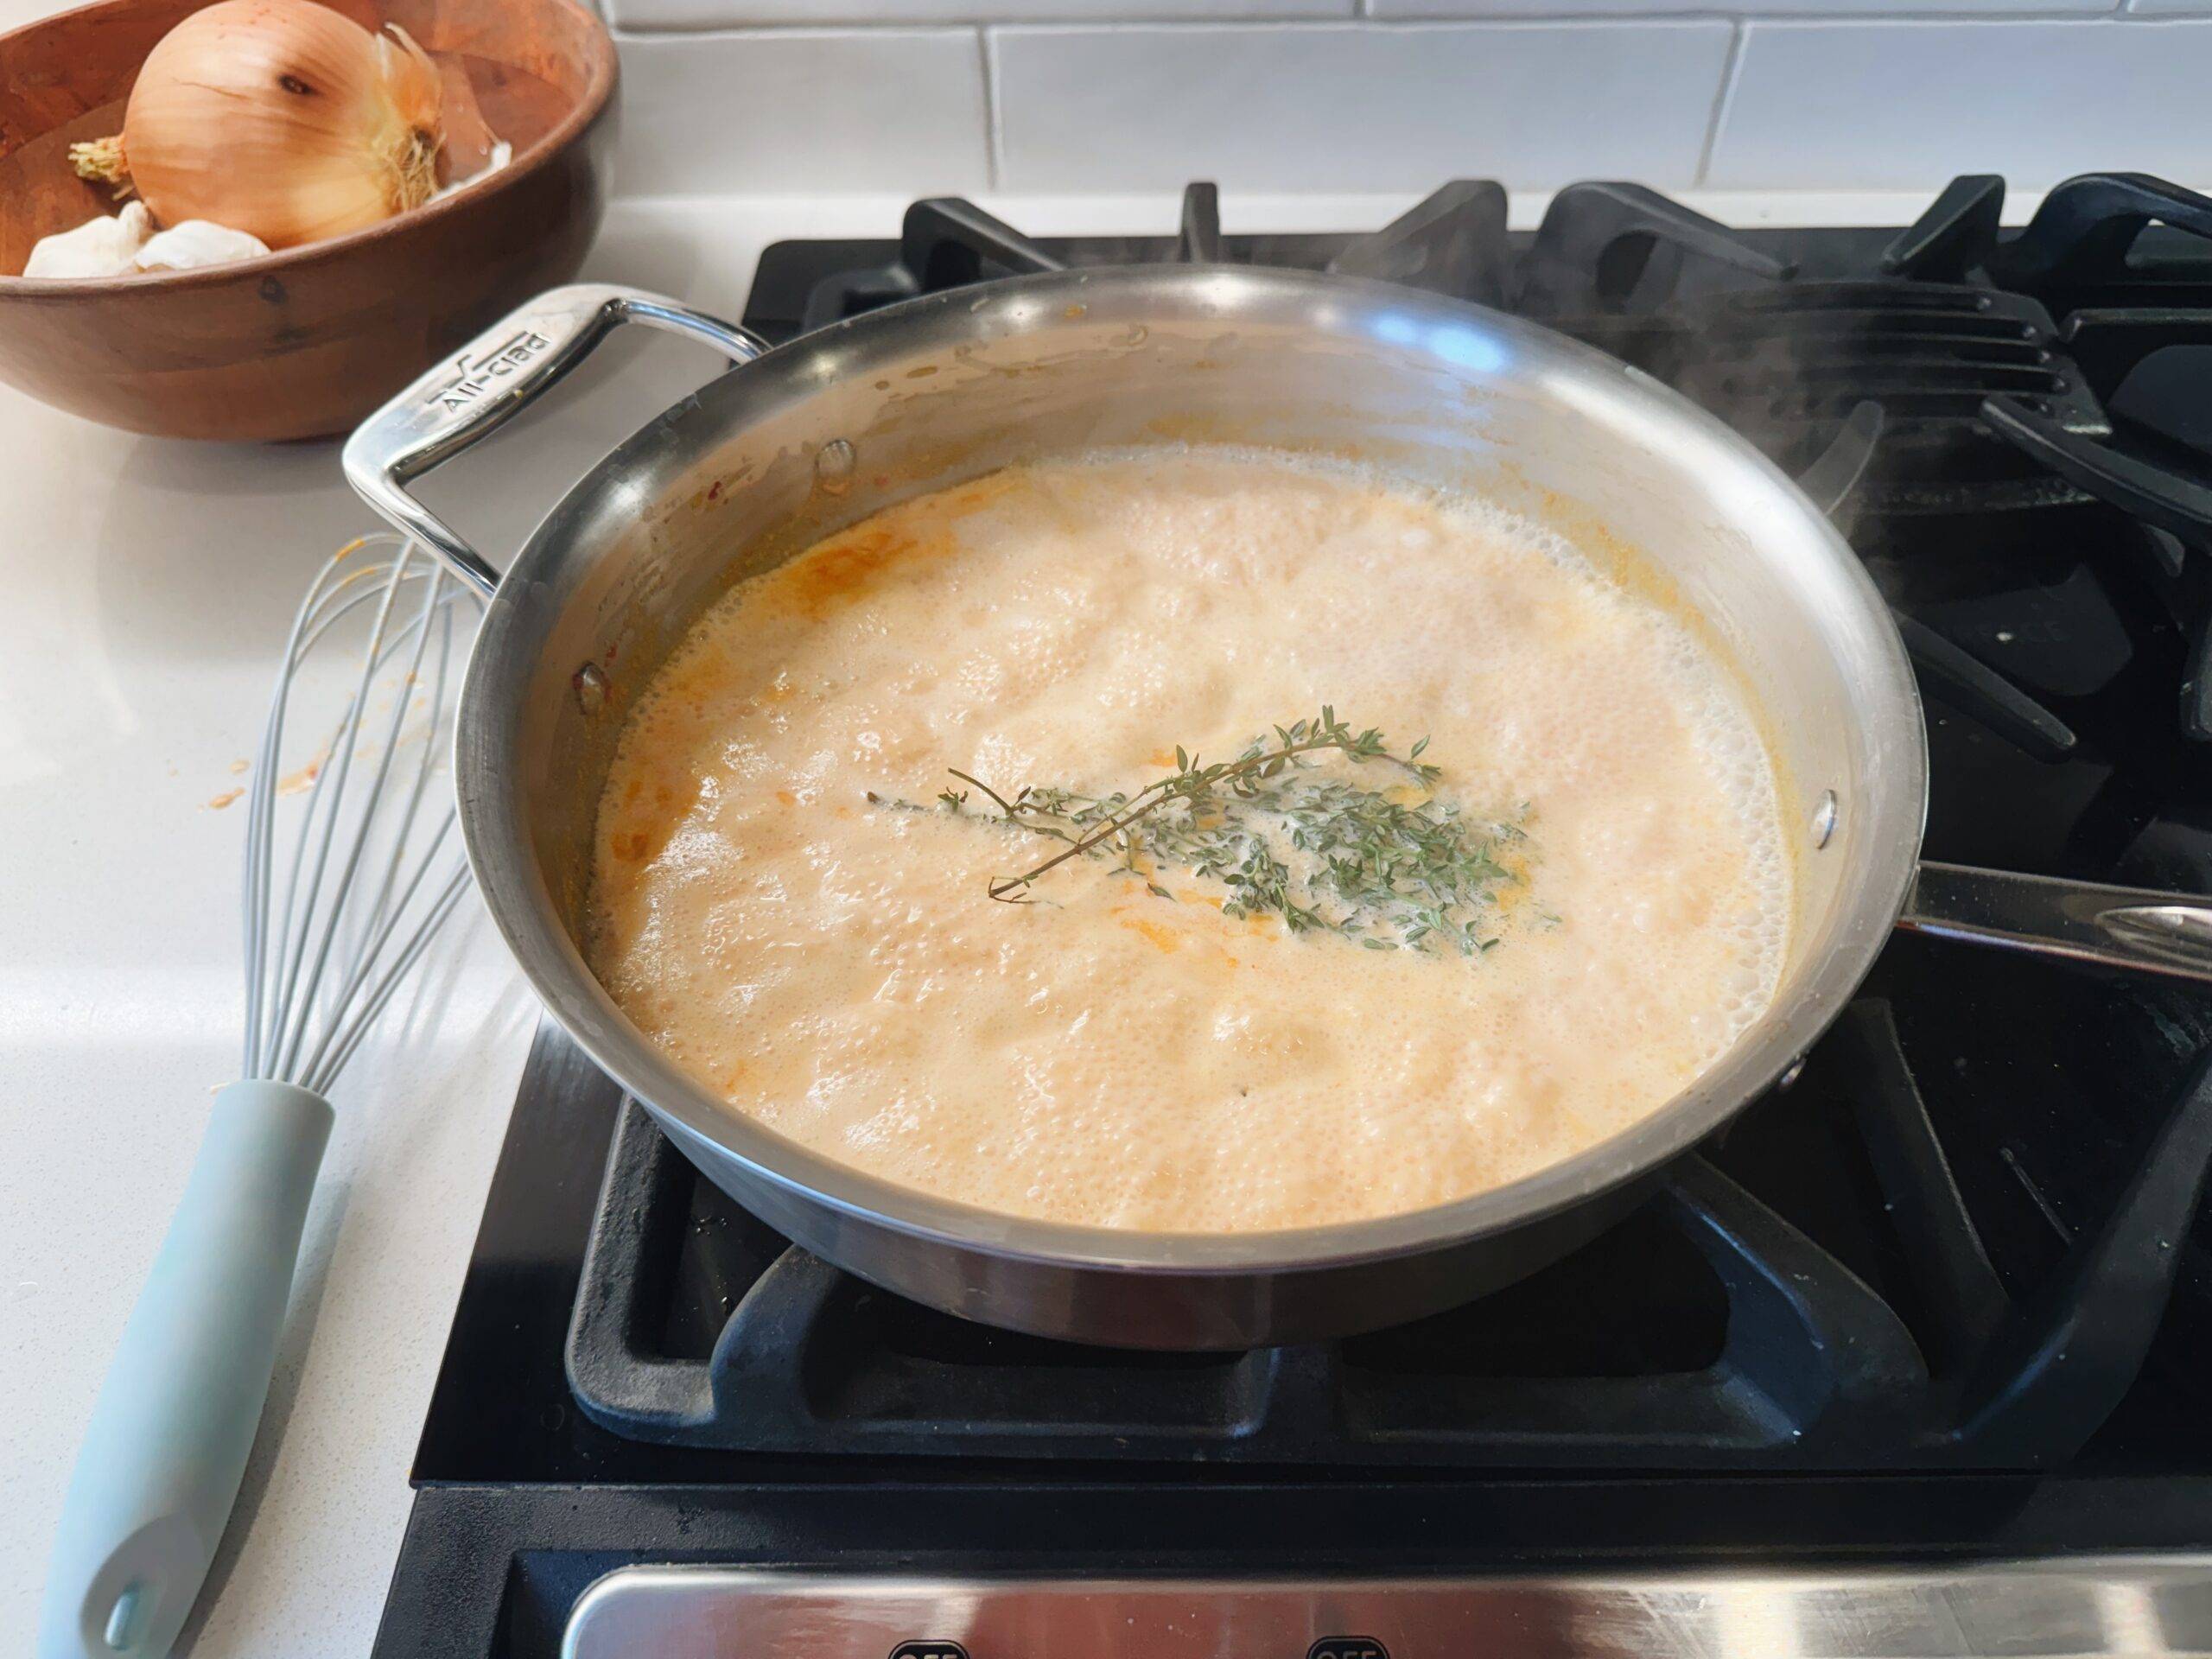 Simmering sauce in a pan with herbs.